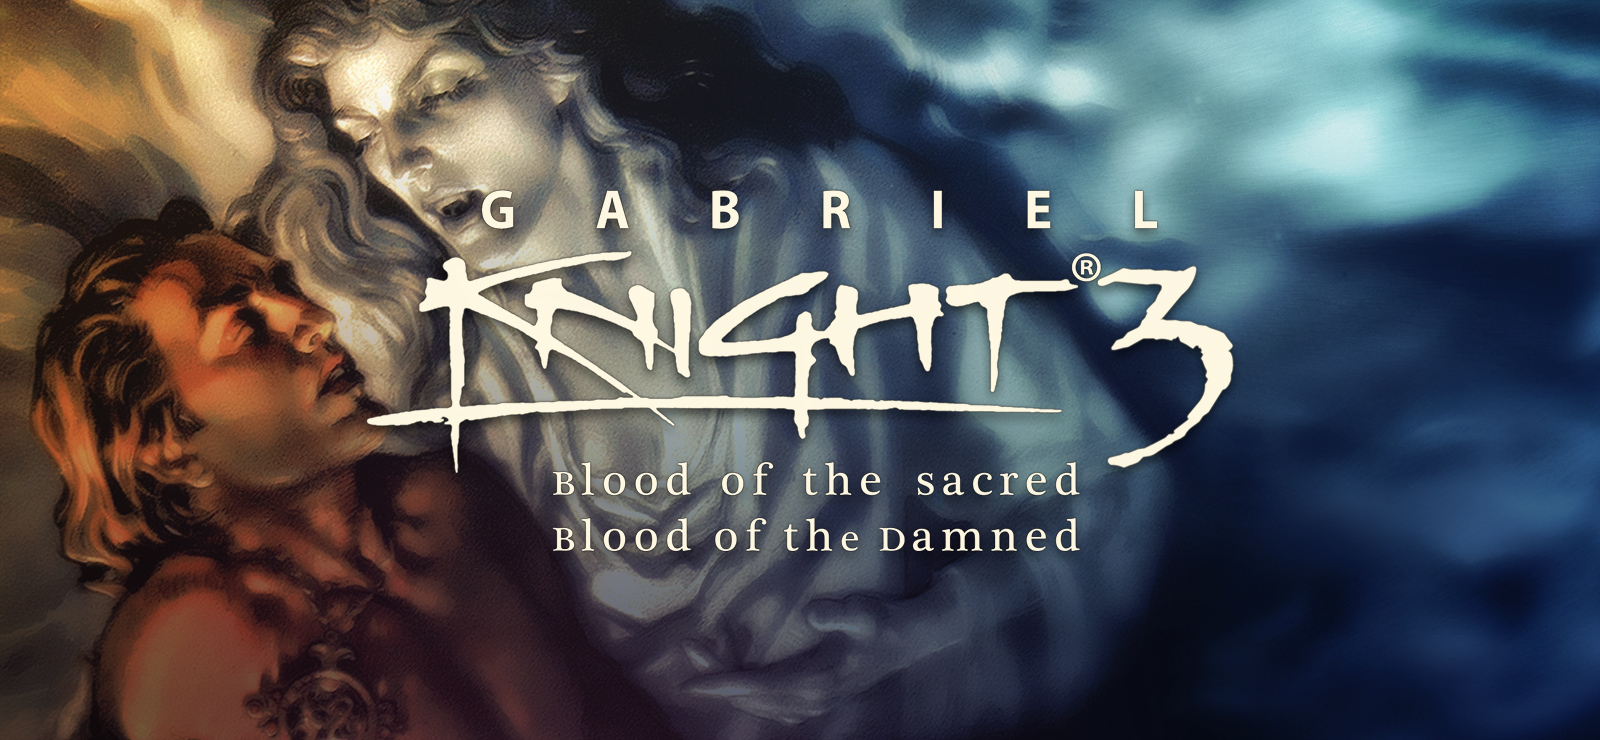 Gabriel Knight 3: Blood Of The Sacred, Blood Of The Damned